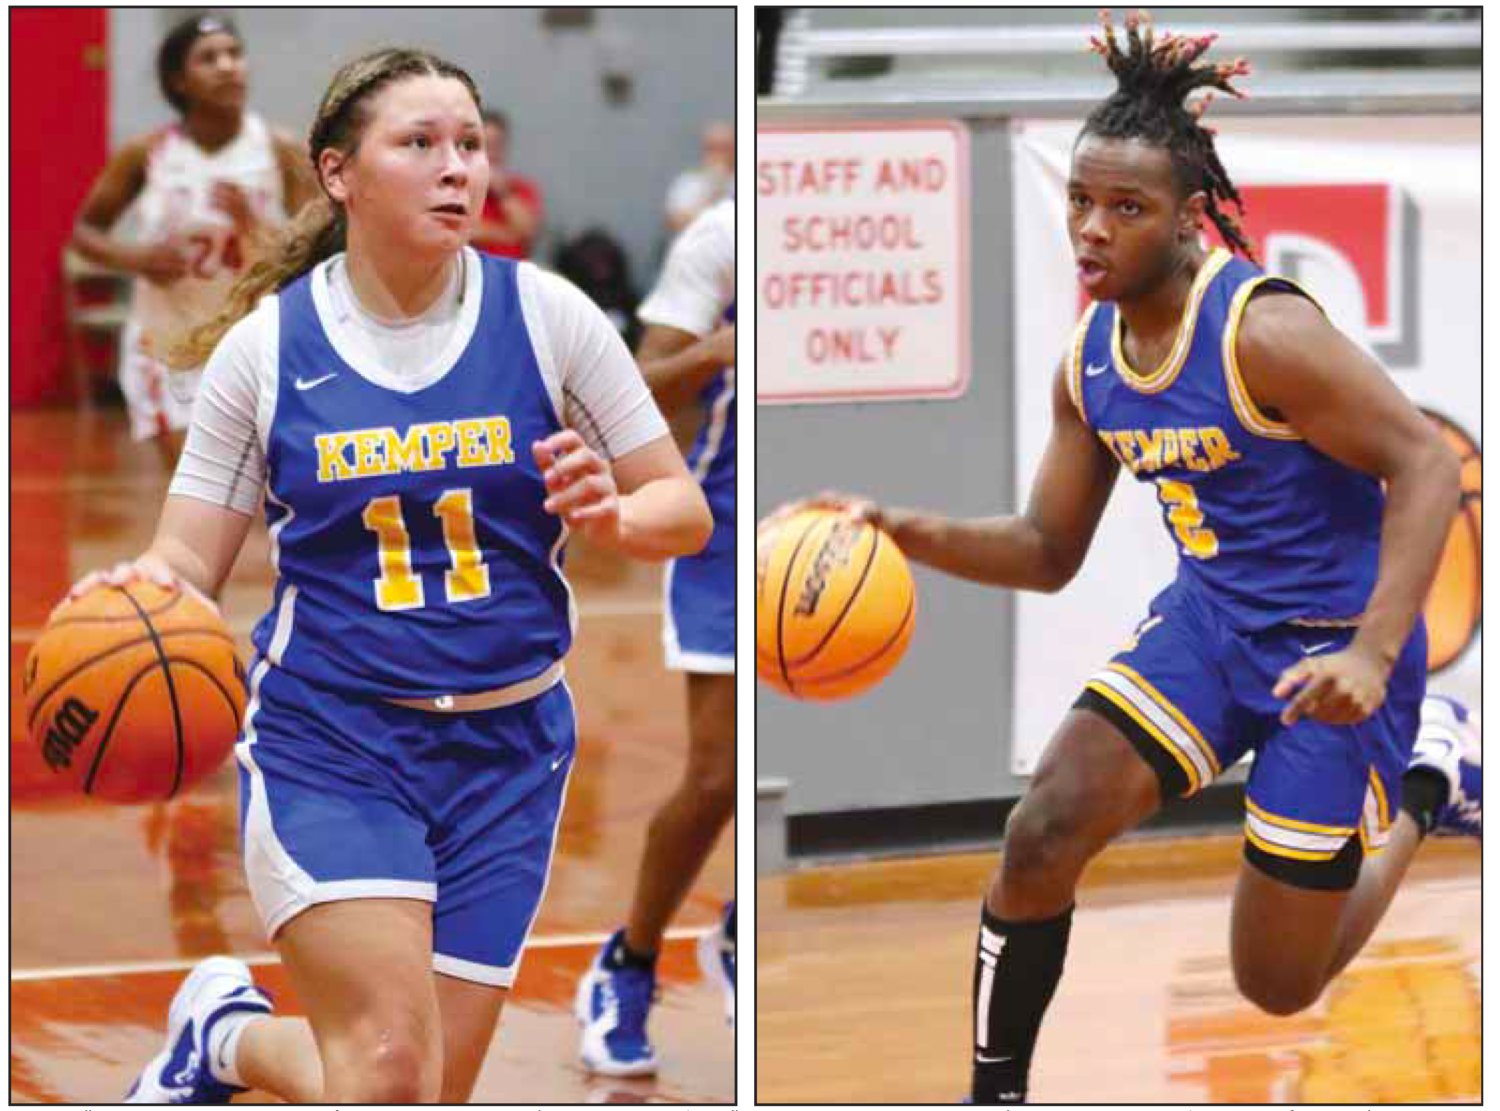 Neera Bell (11) goes down court to score for the Kemper County Wildcats in recent basketball action. At right, Kemper County's Cameron Butler (2) drives to the basket to score for the Wildcats in recent basketball action.